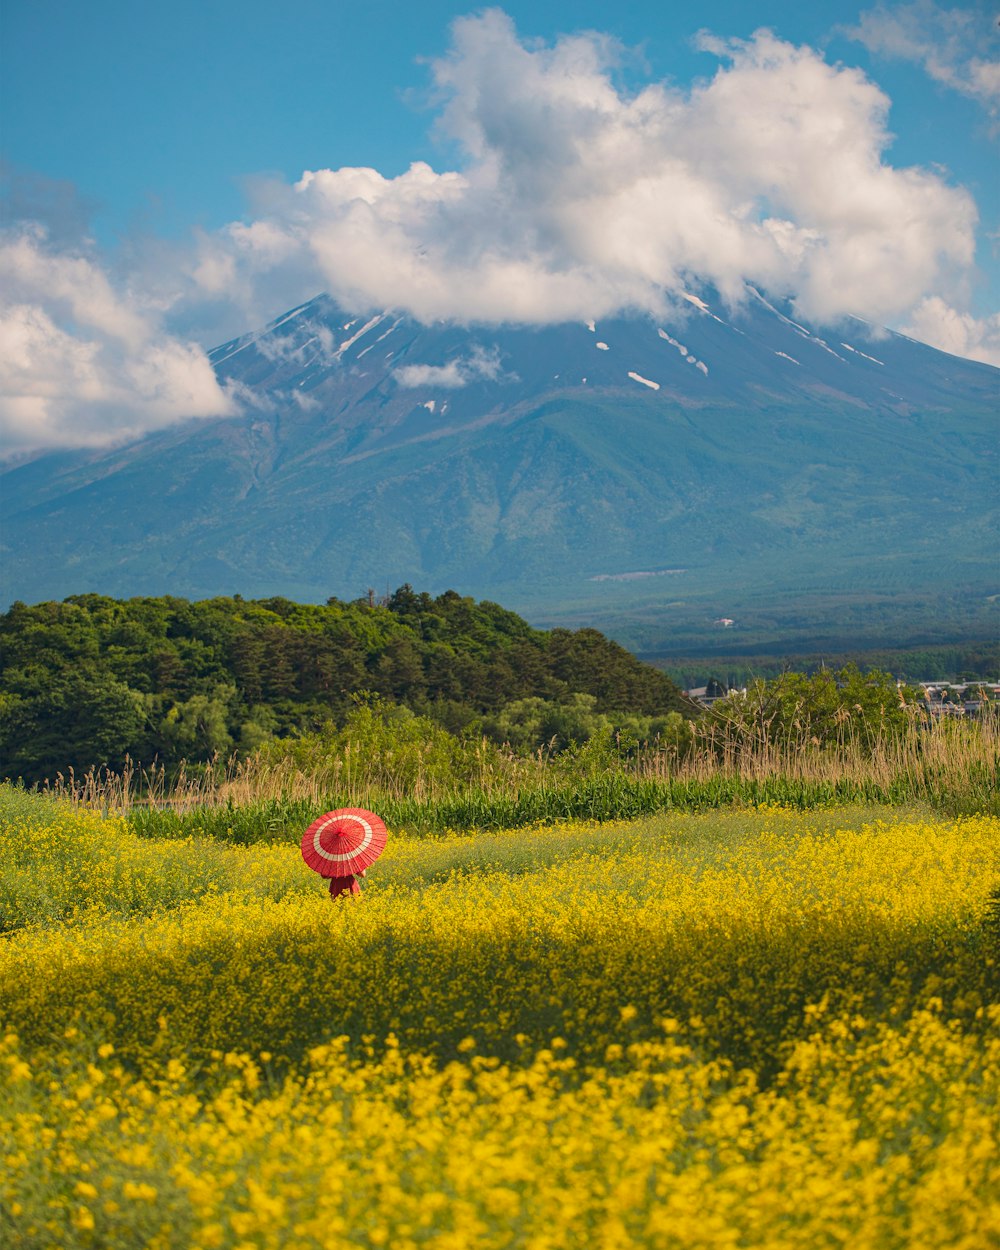 a field of yellow flowers with a mountain in the background